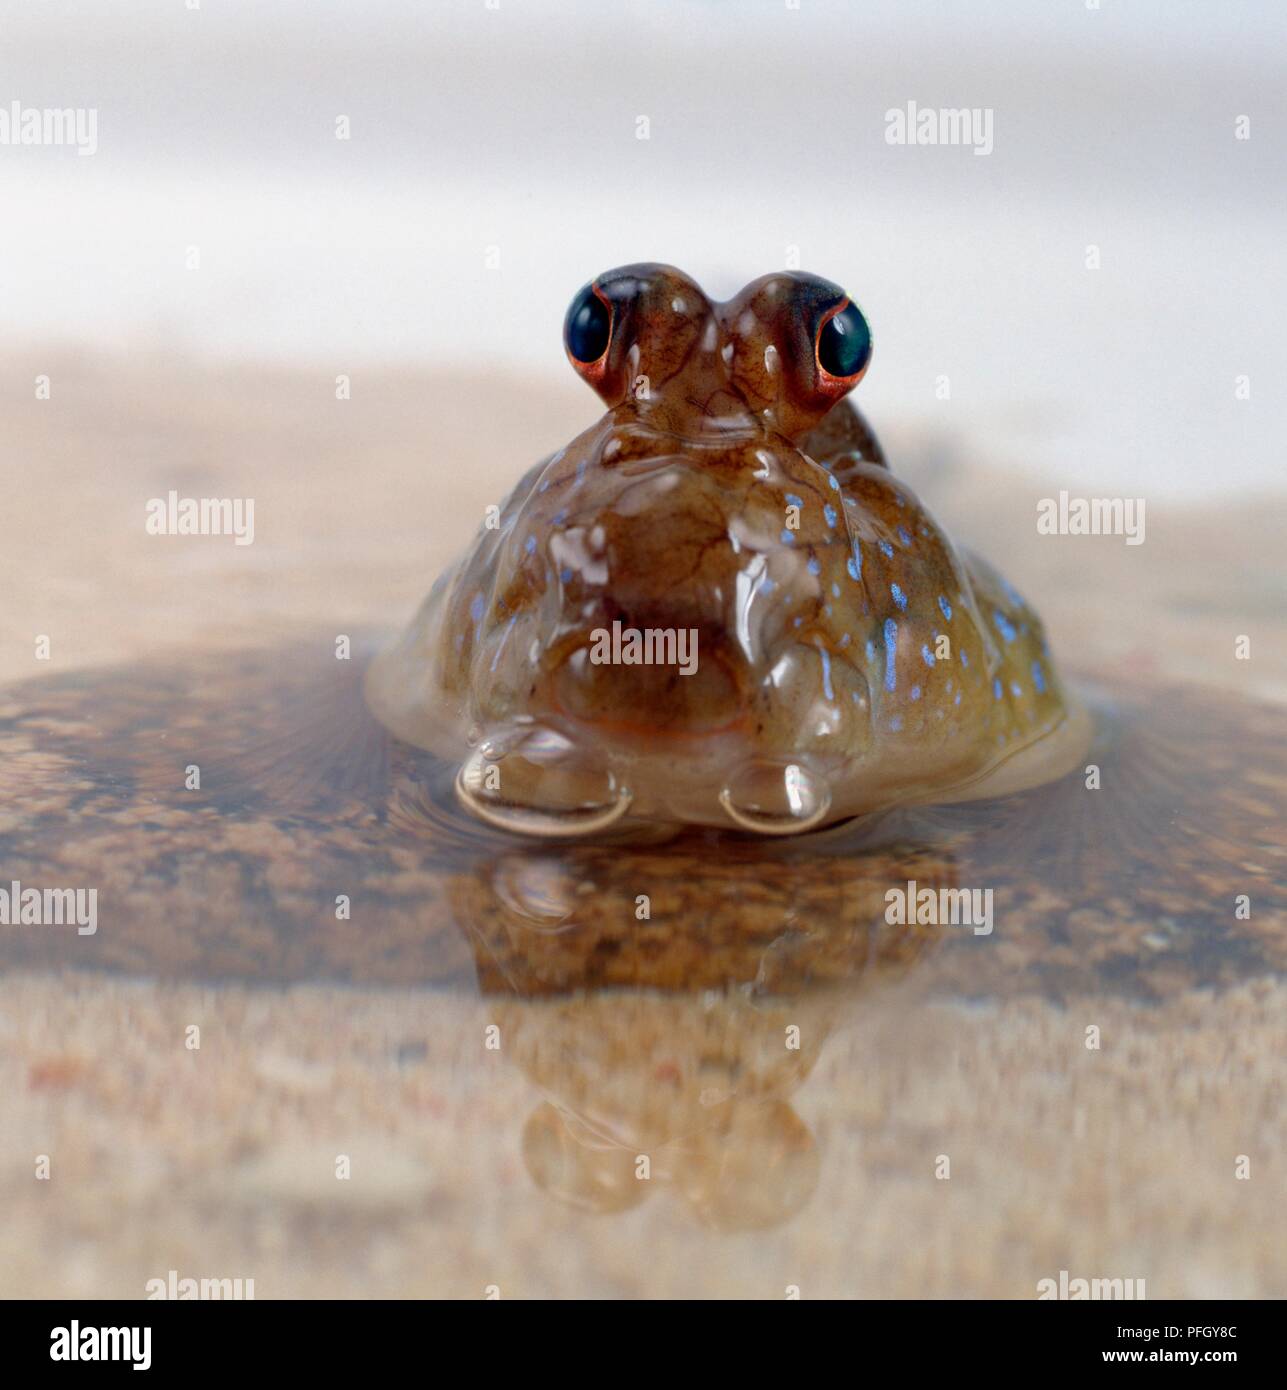 Mudskipper in water showing large, bulbous eyes Stock Photo